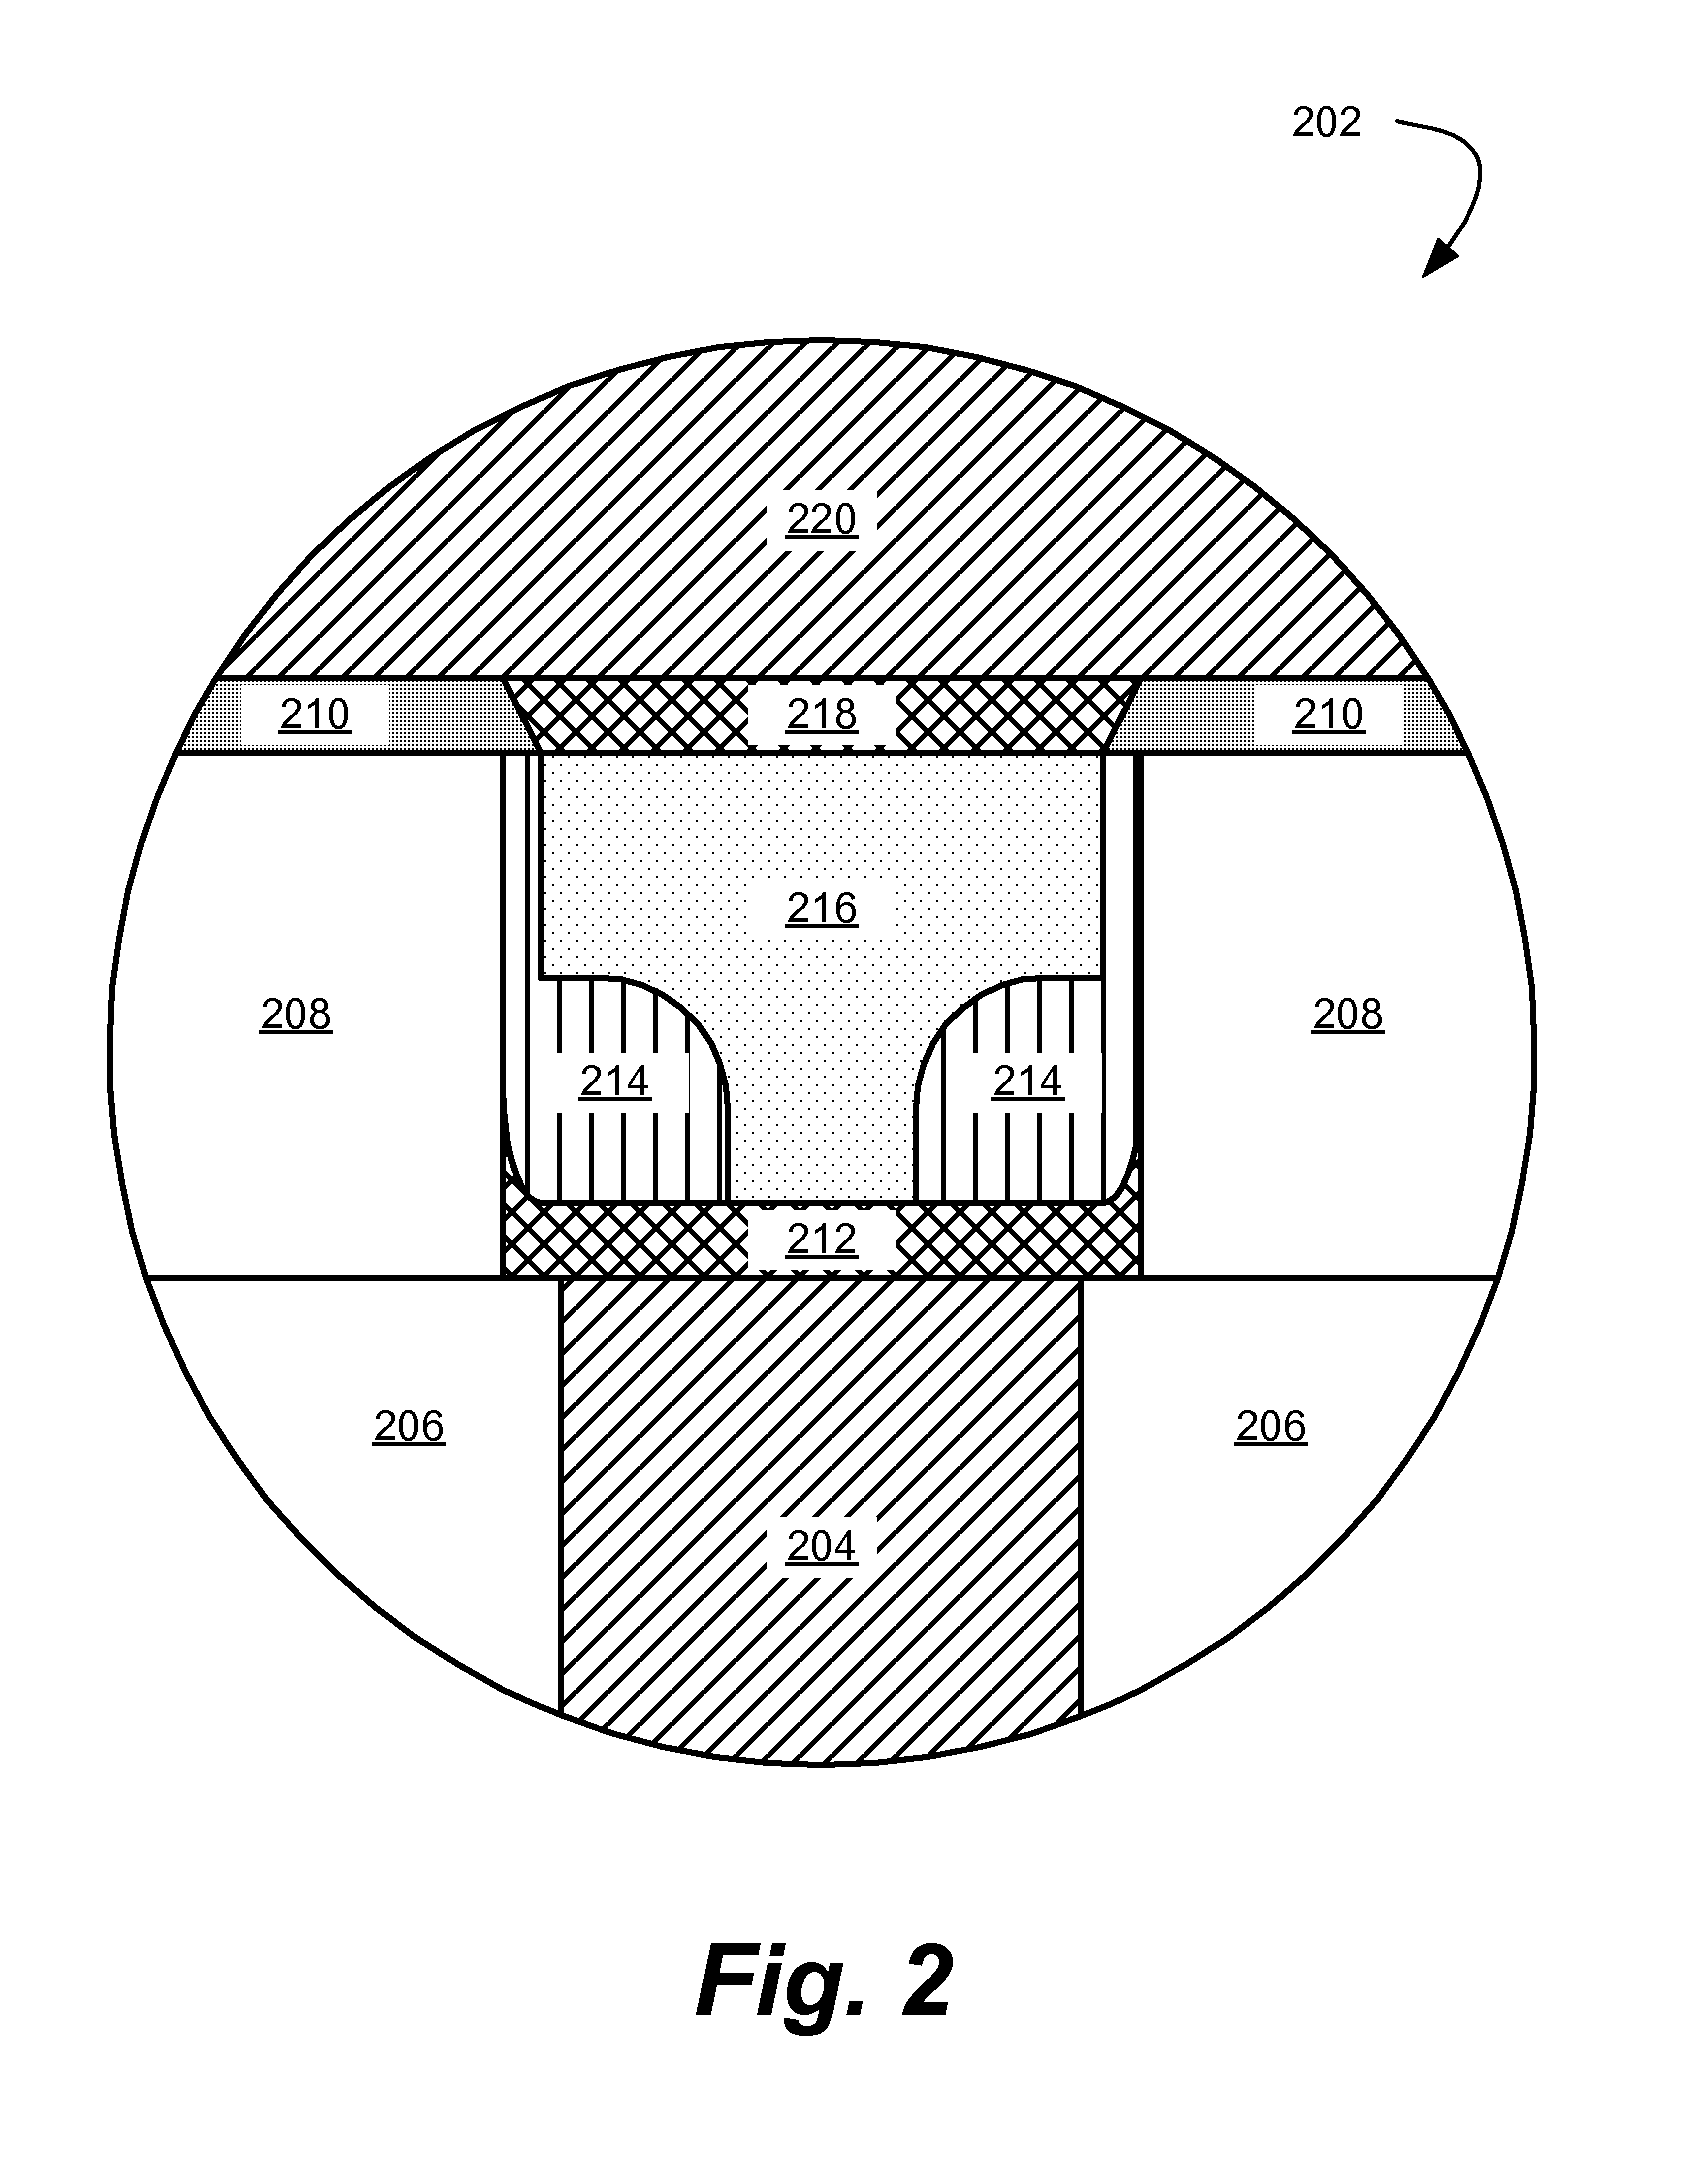 Self-aligned in-contact phase change memory device